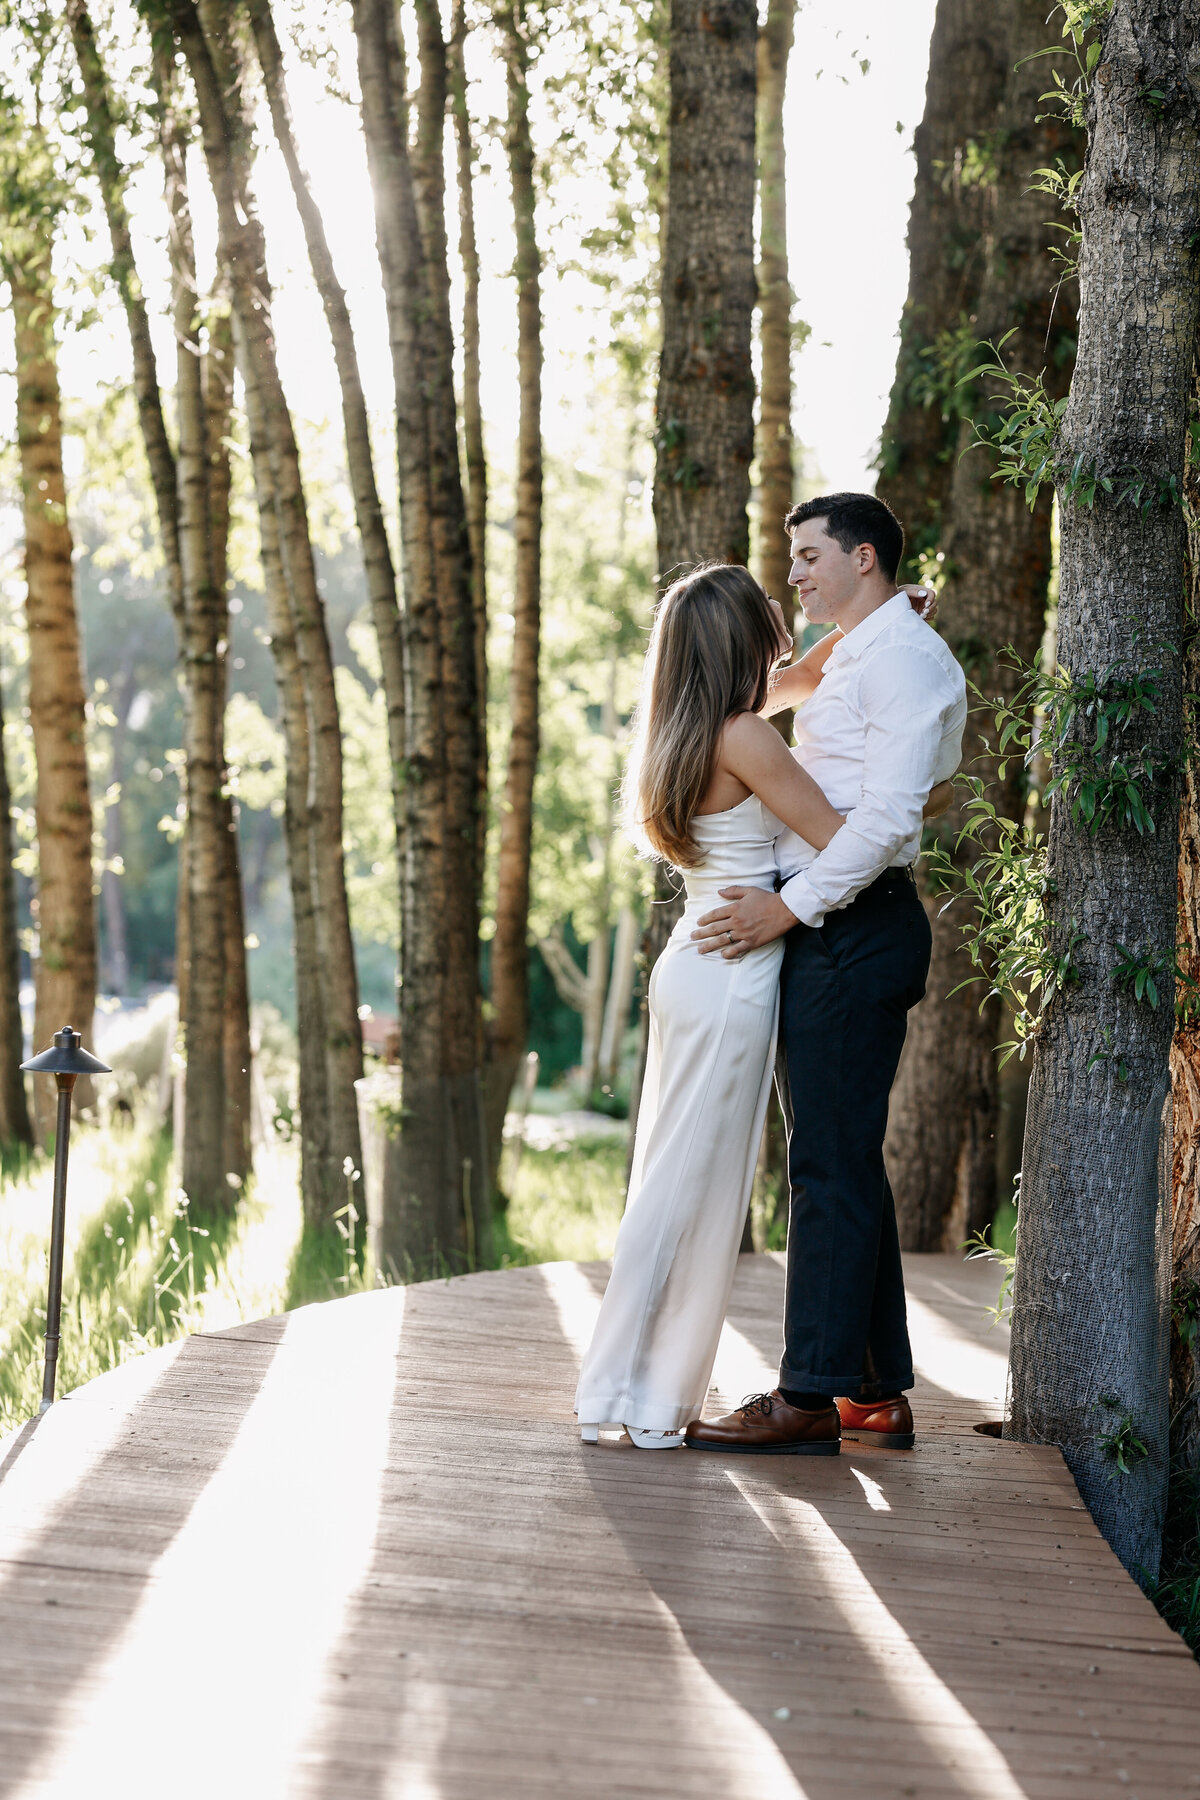 A golden hour moment between the bride and groom, in an aspen wedding,